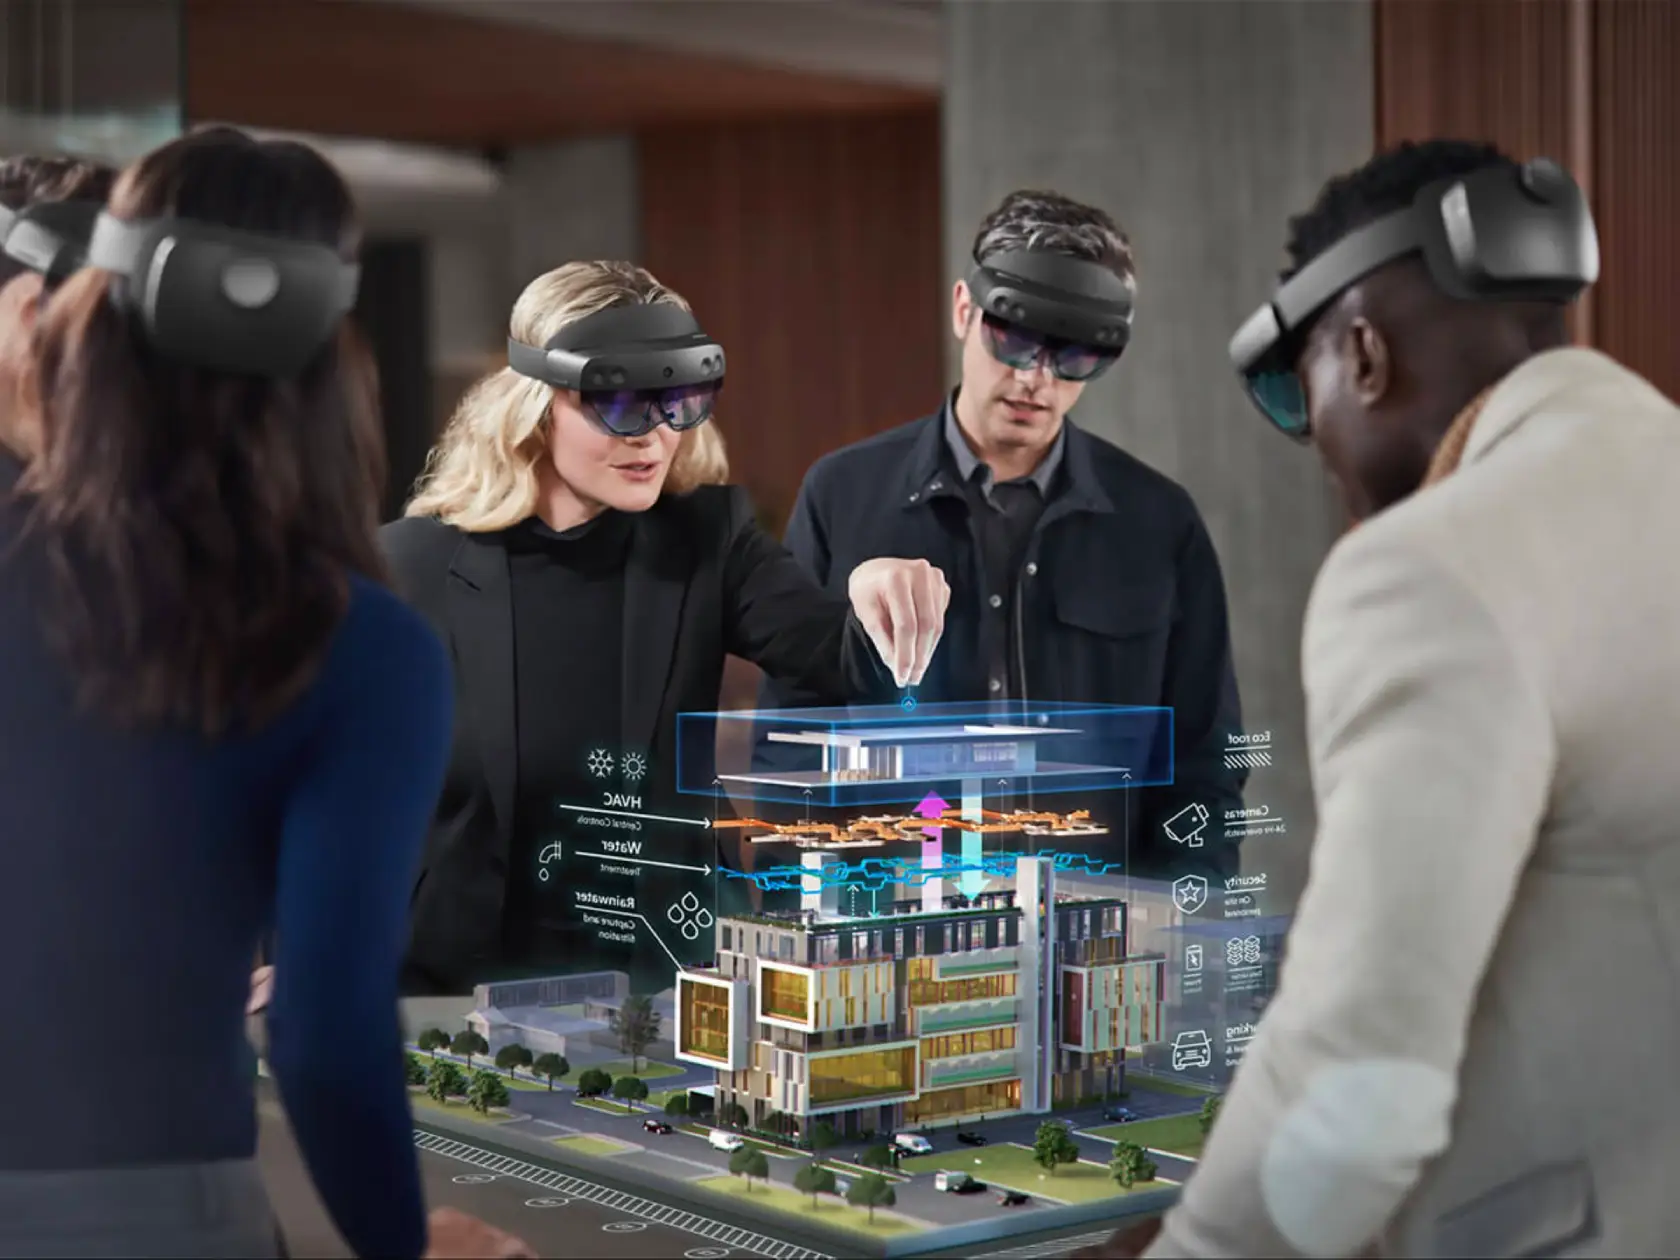 Group of people wearing black augmented reality headsets standing around a augmented reality real estate showcase